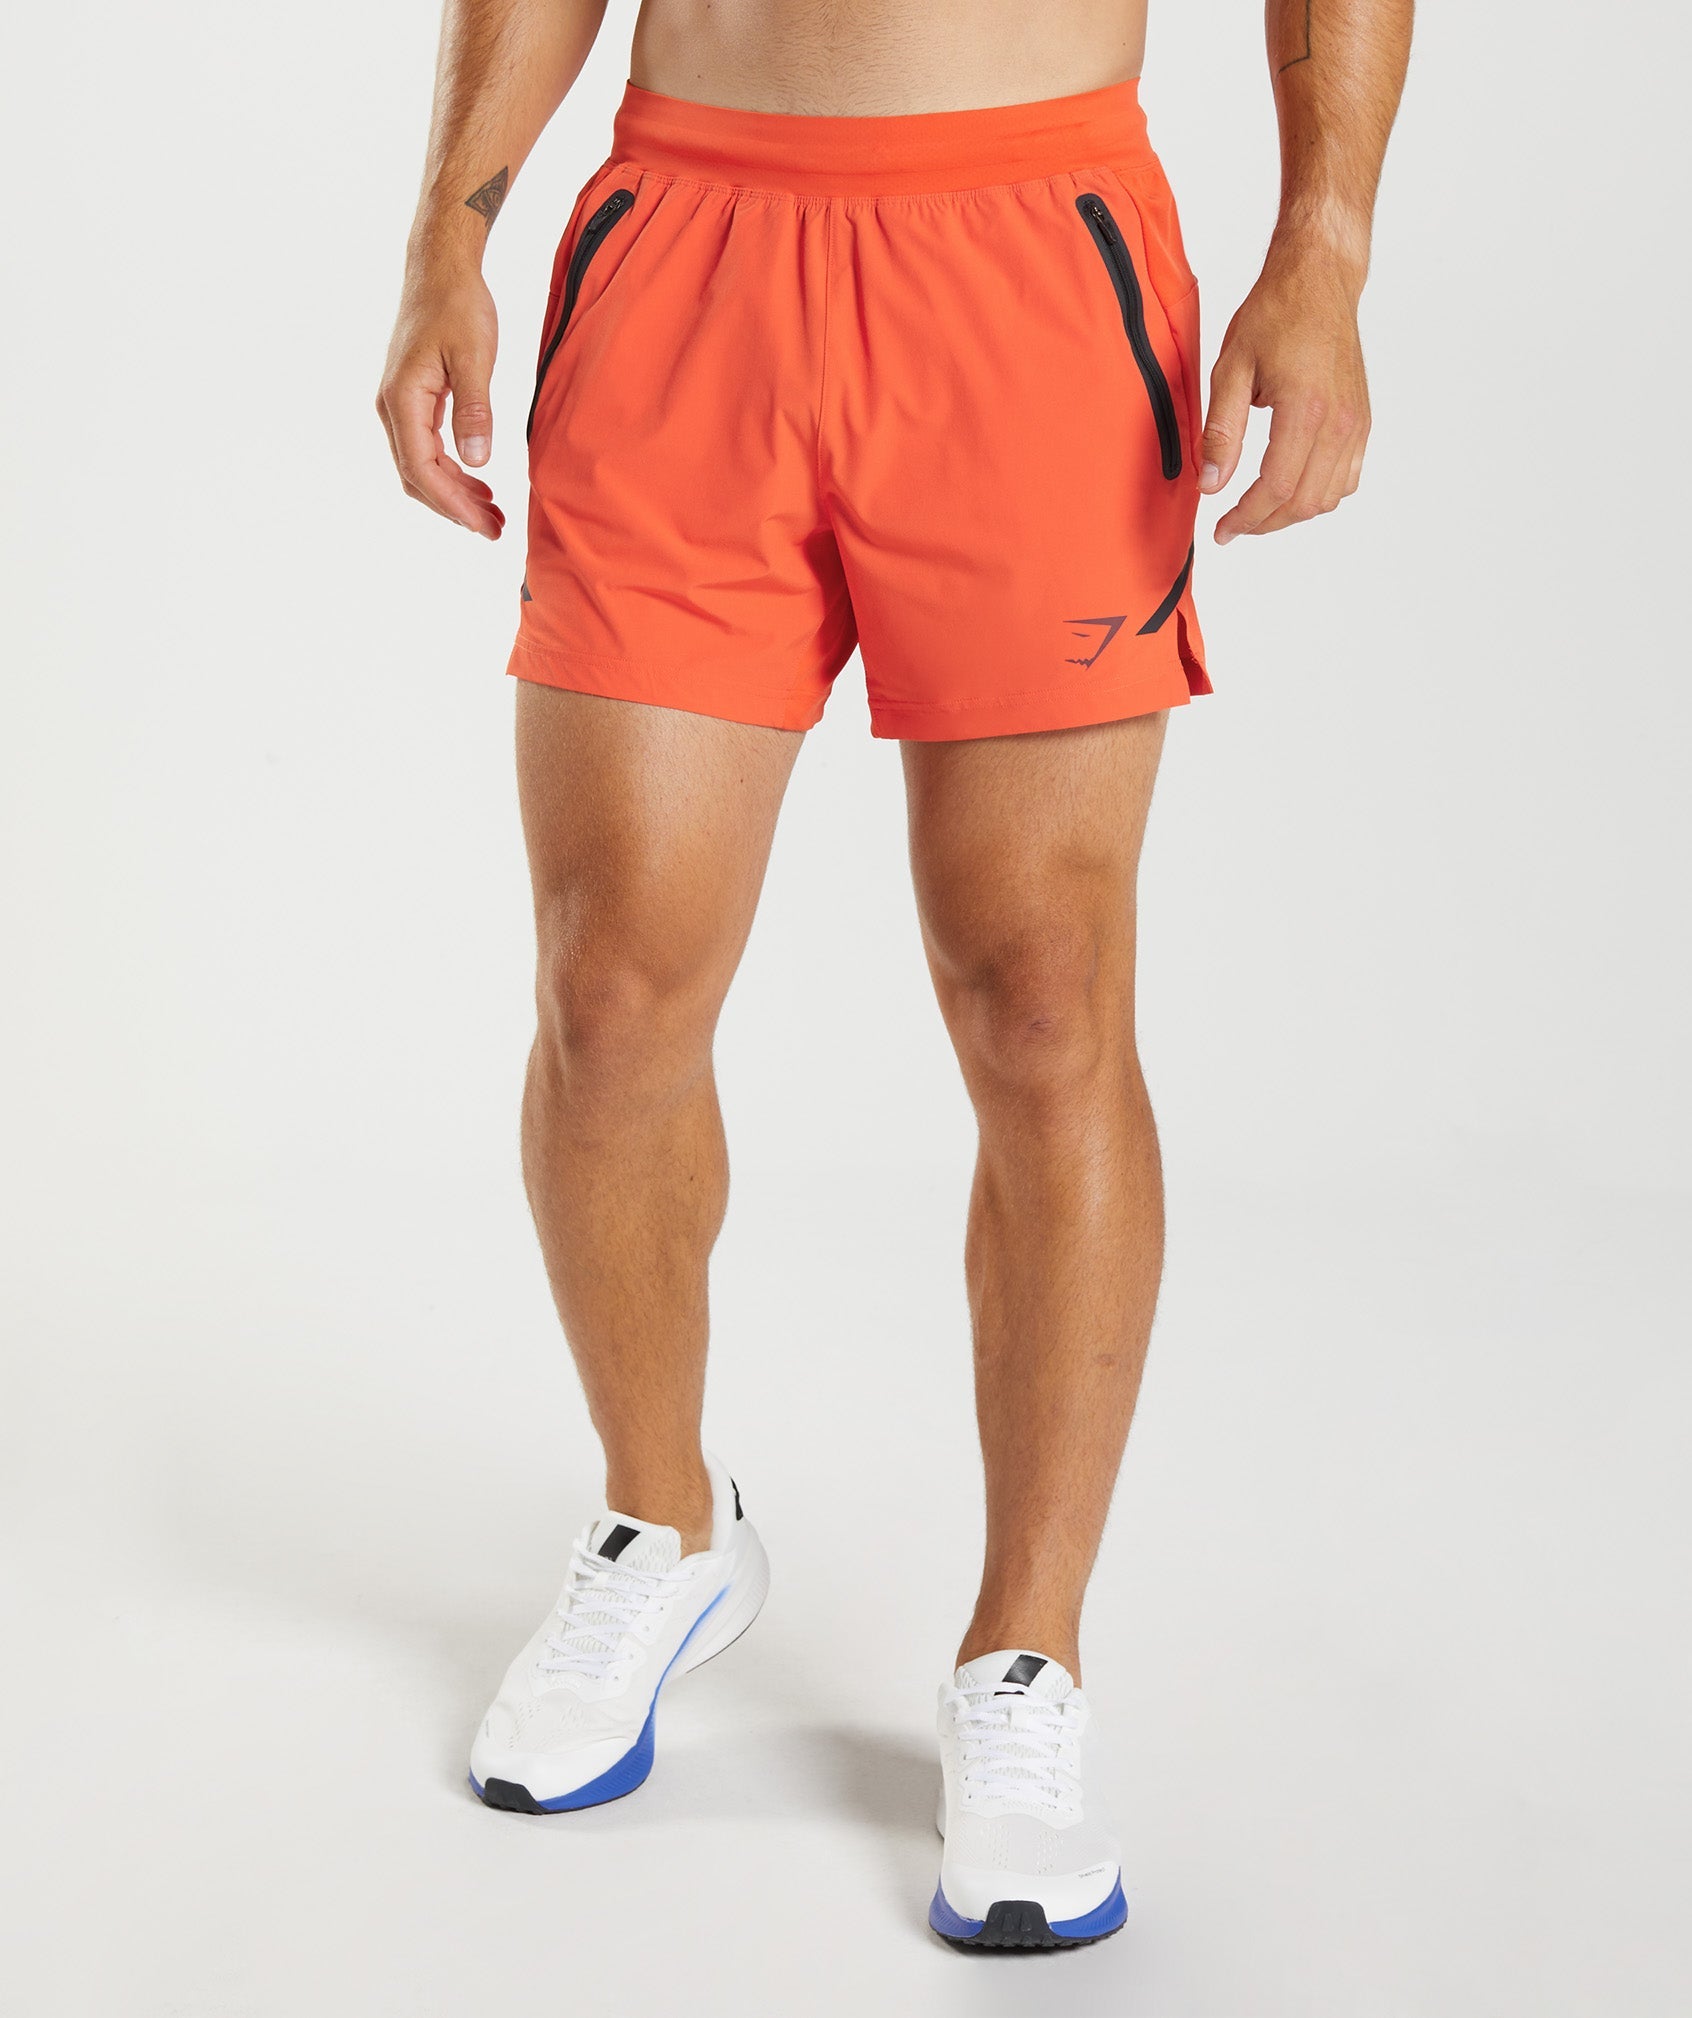 Apex 5" Perform Shorts in Pepper Red - view 1